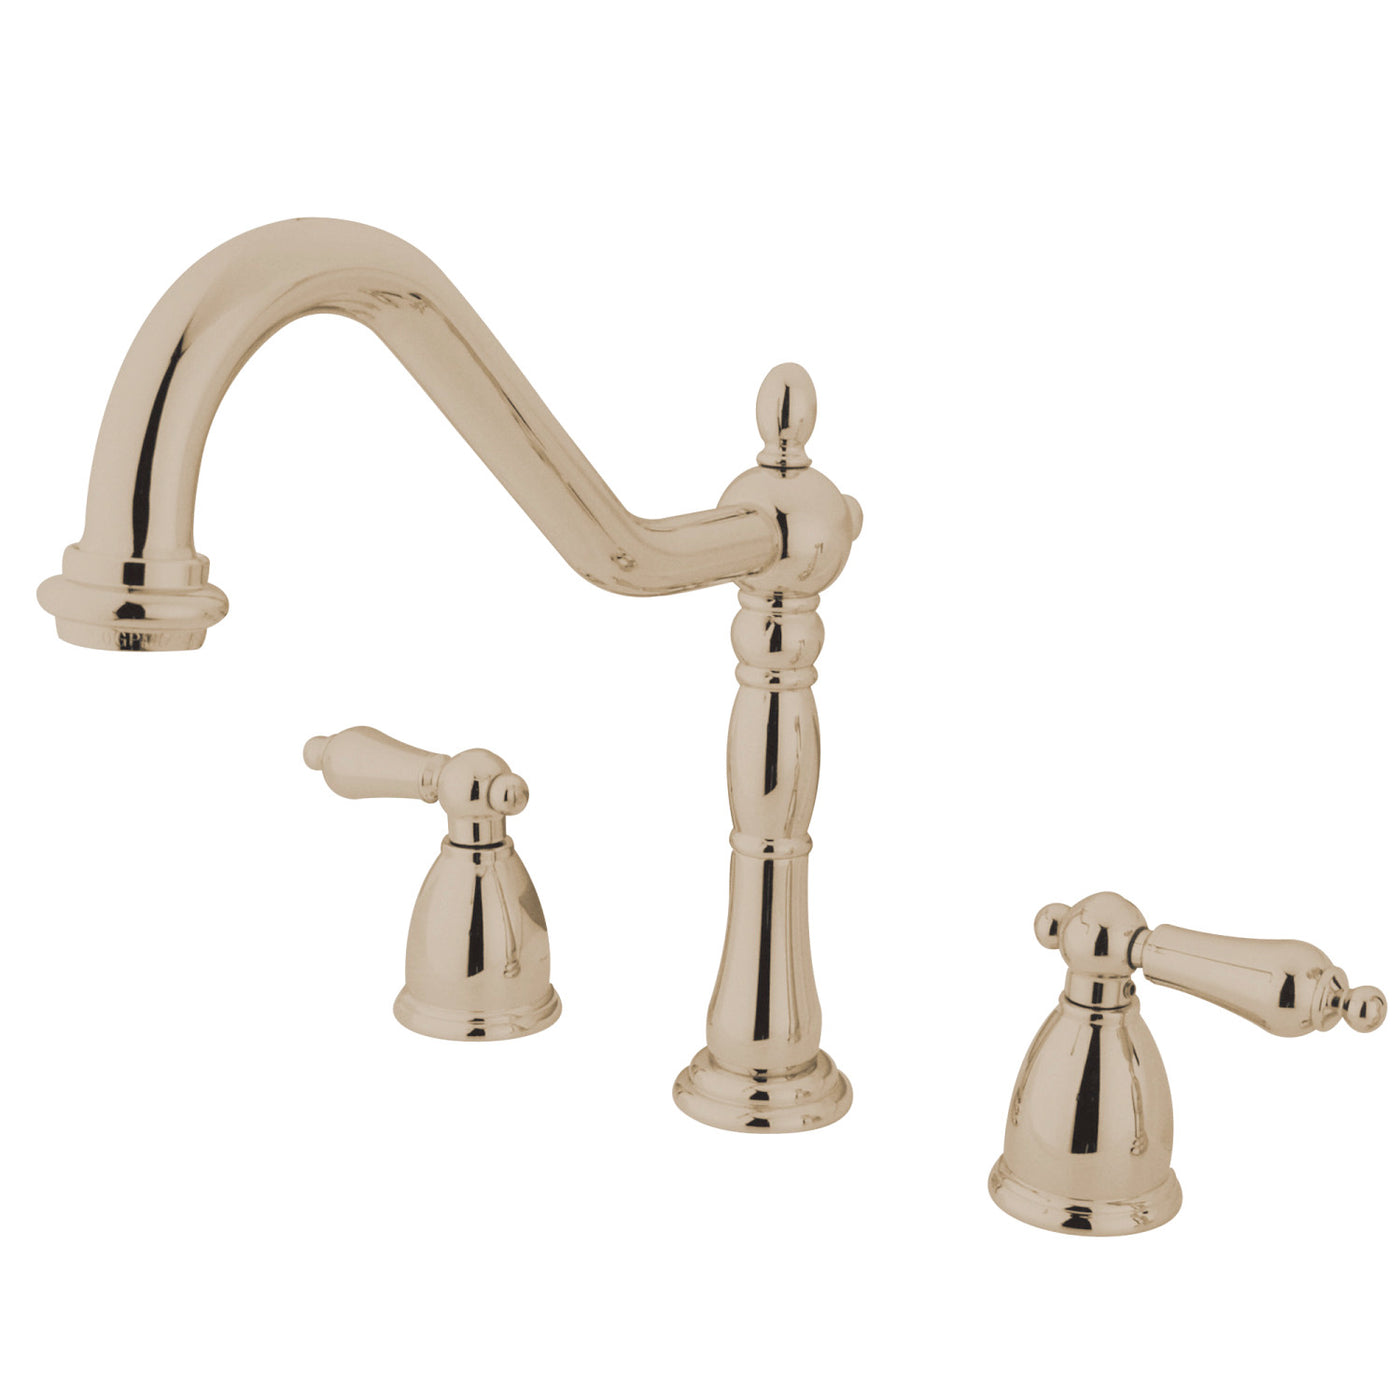 Elements of Design EB1796ALLS Widespread Kitchen Faucet, Polished Nickel